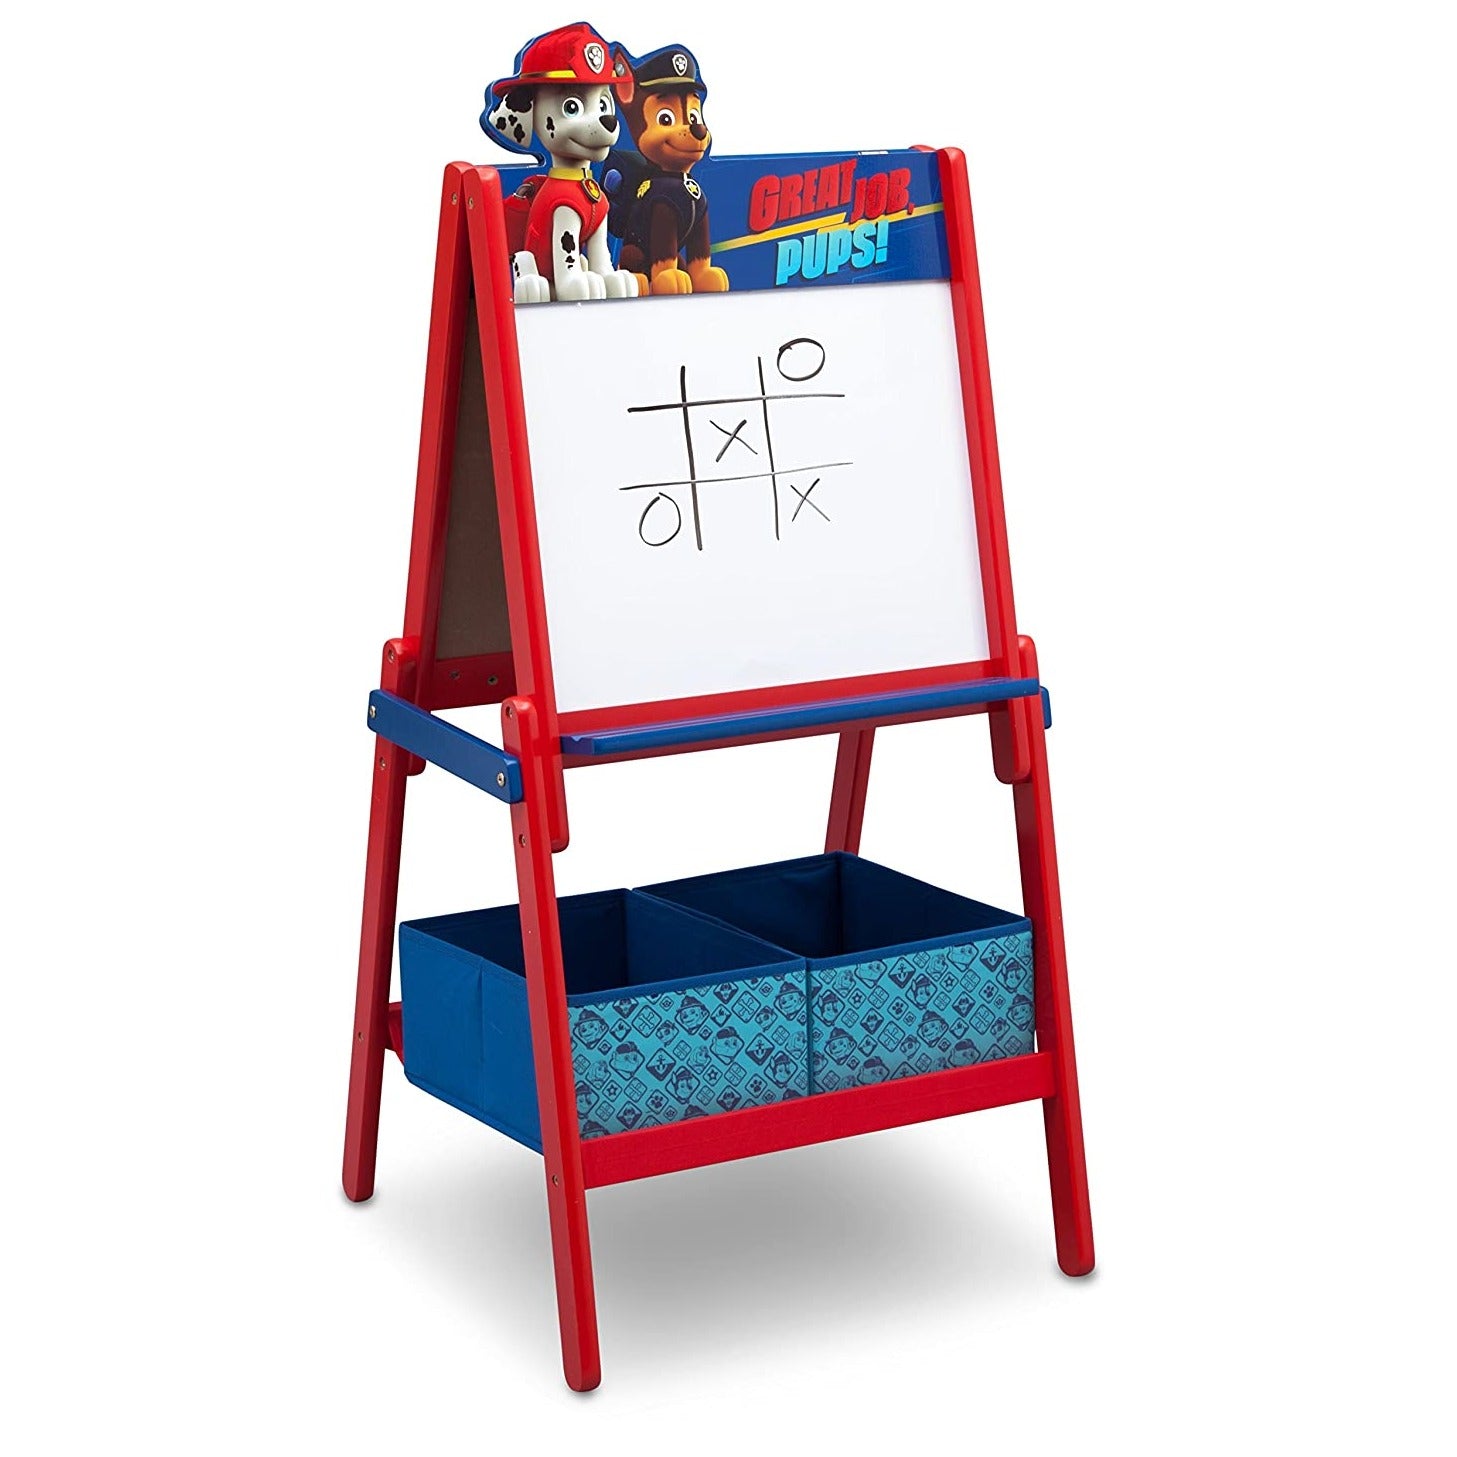 Paw Patrol Easel With Storage